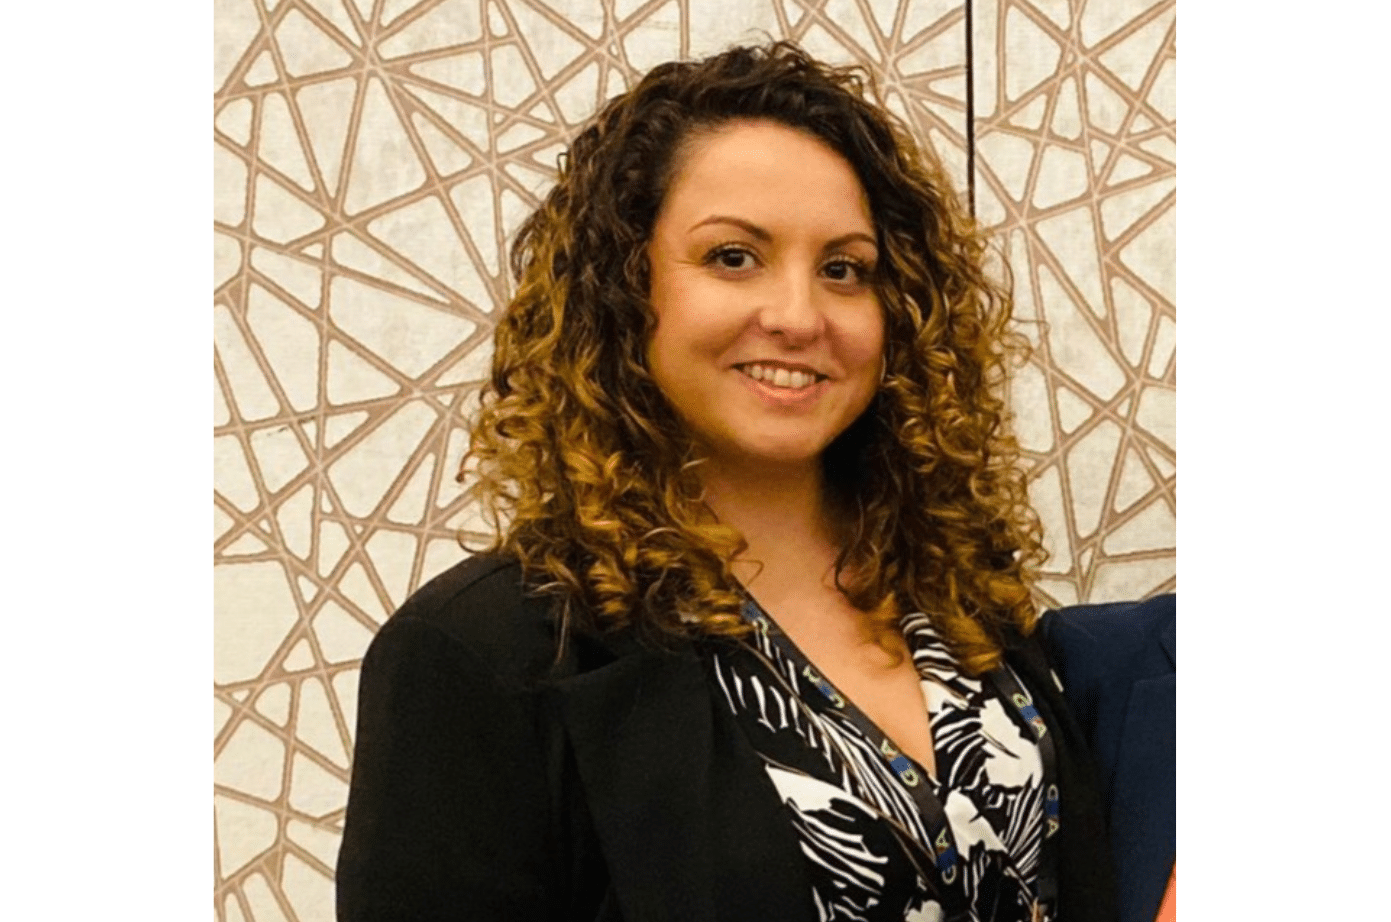 CAP Worldwide Serviced Apartments Welcomes Jessica Sharpe as Global Sales Director